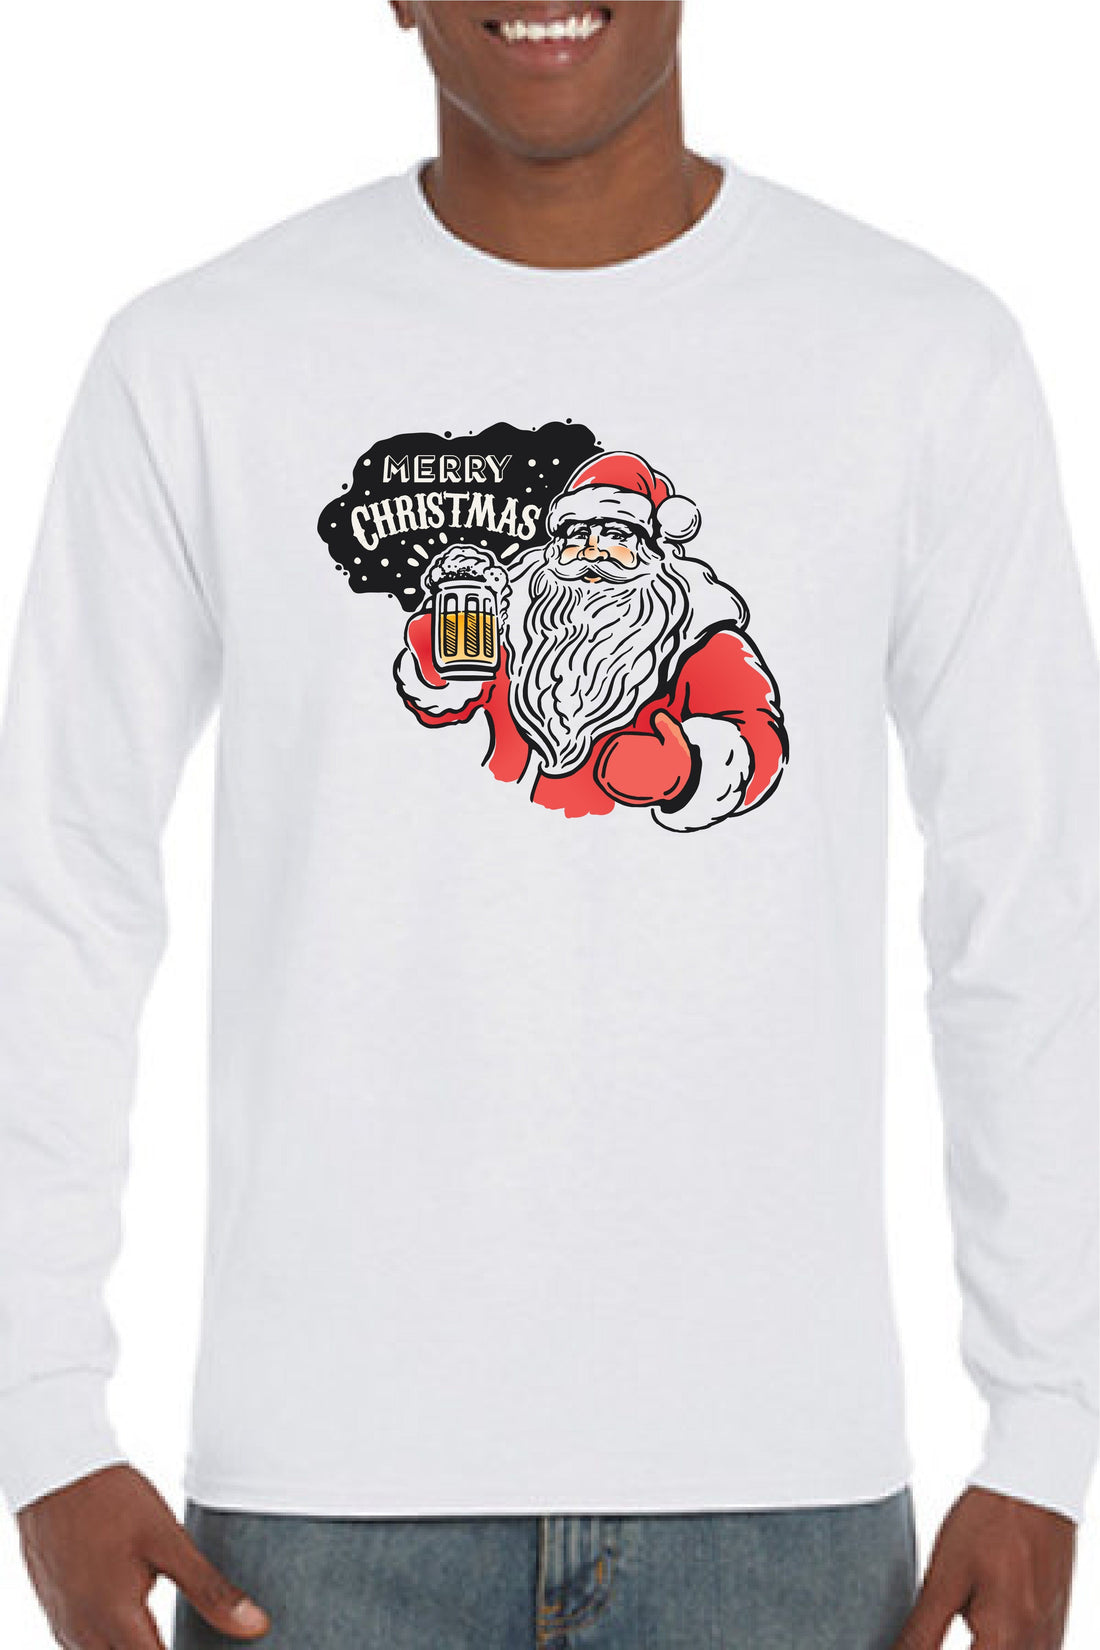 Santa has a Beer and Ready to Celebrate Long Sleeve Tee